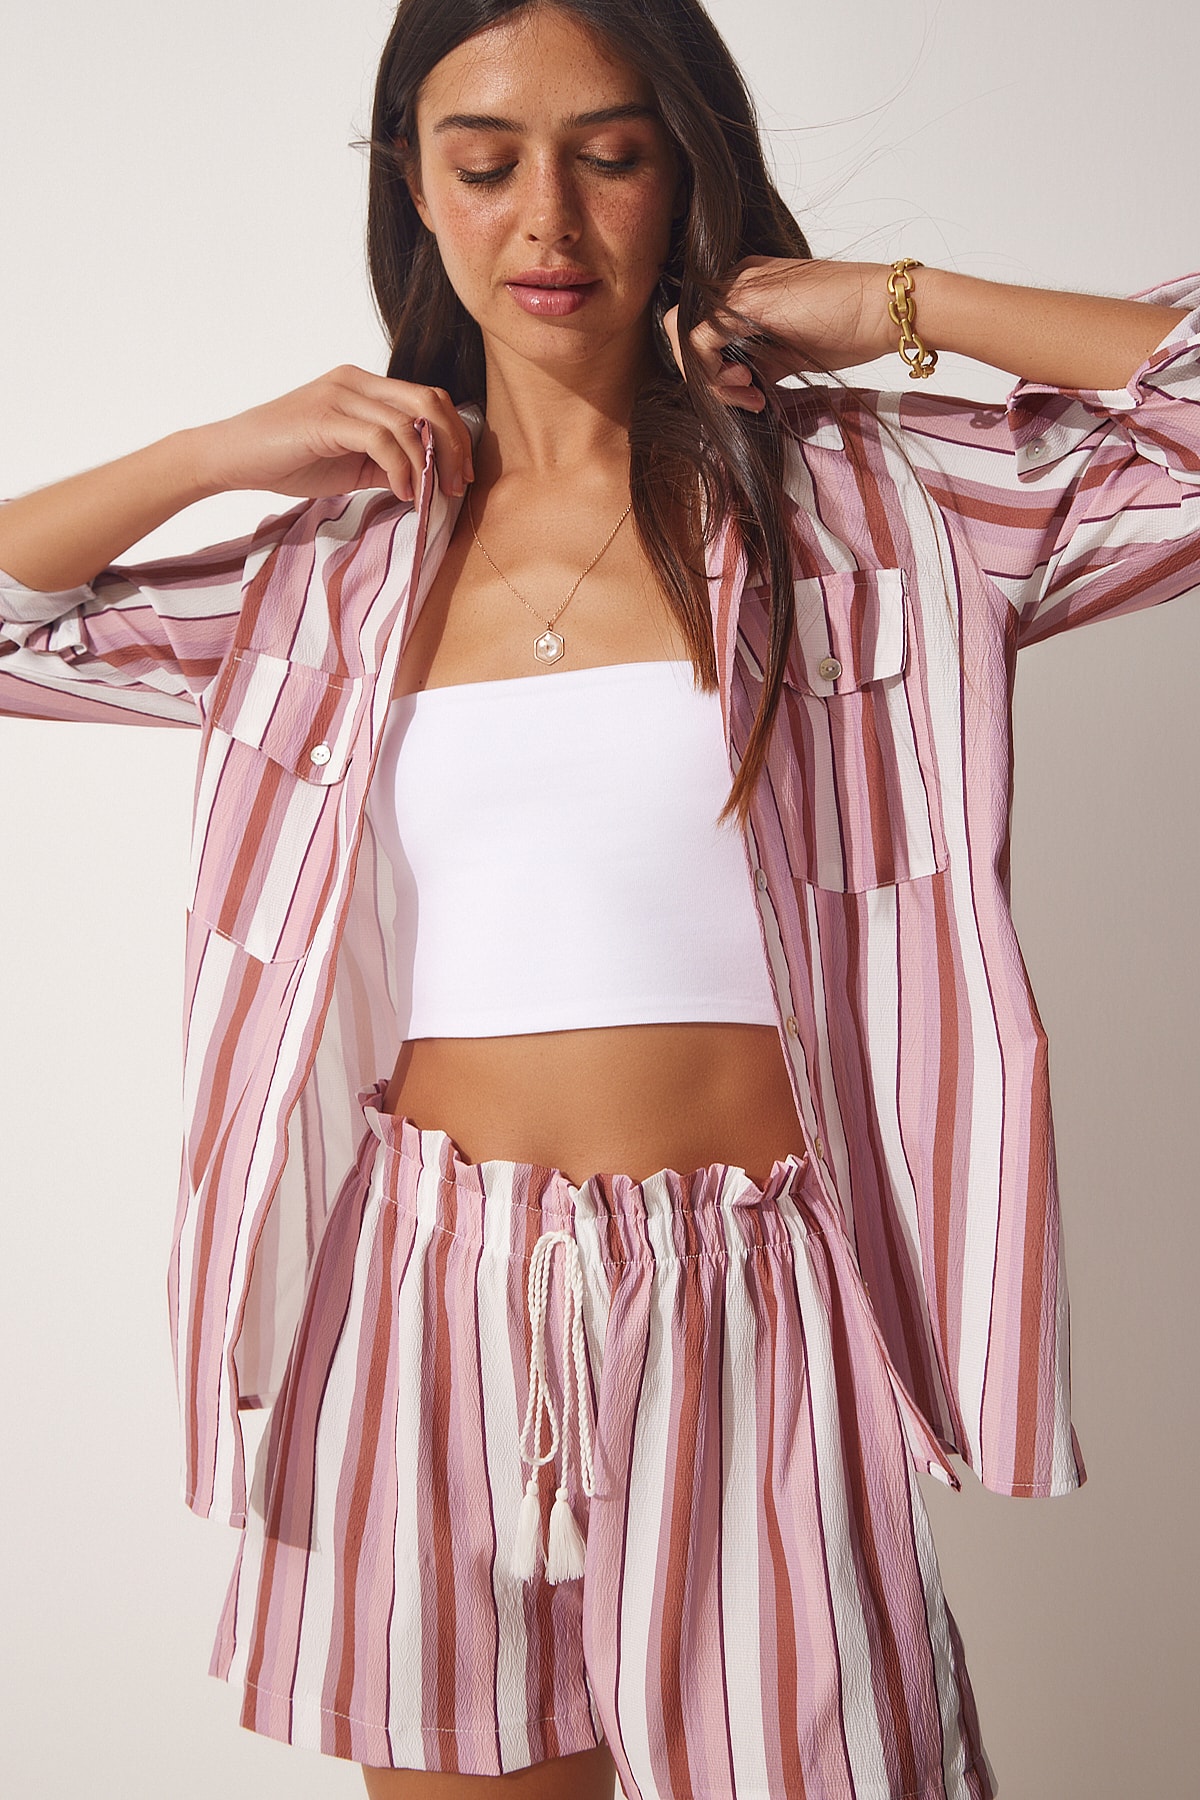 Happiness İstanbul Women's Pink Striped Linen Viscose Shirt and Shorts Set